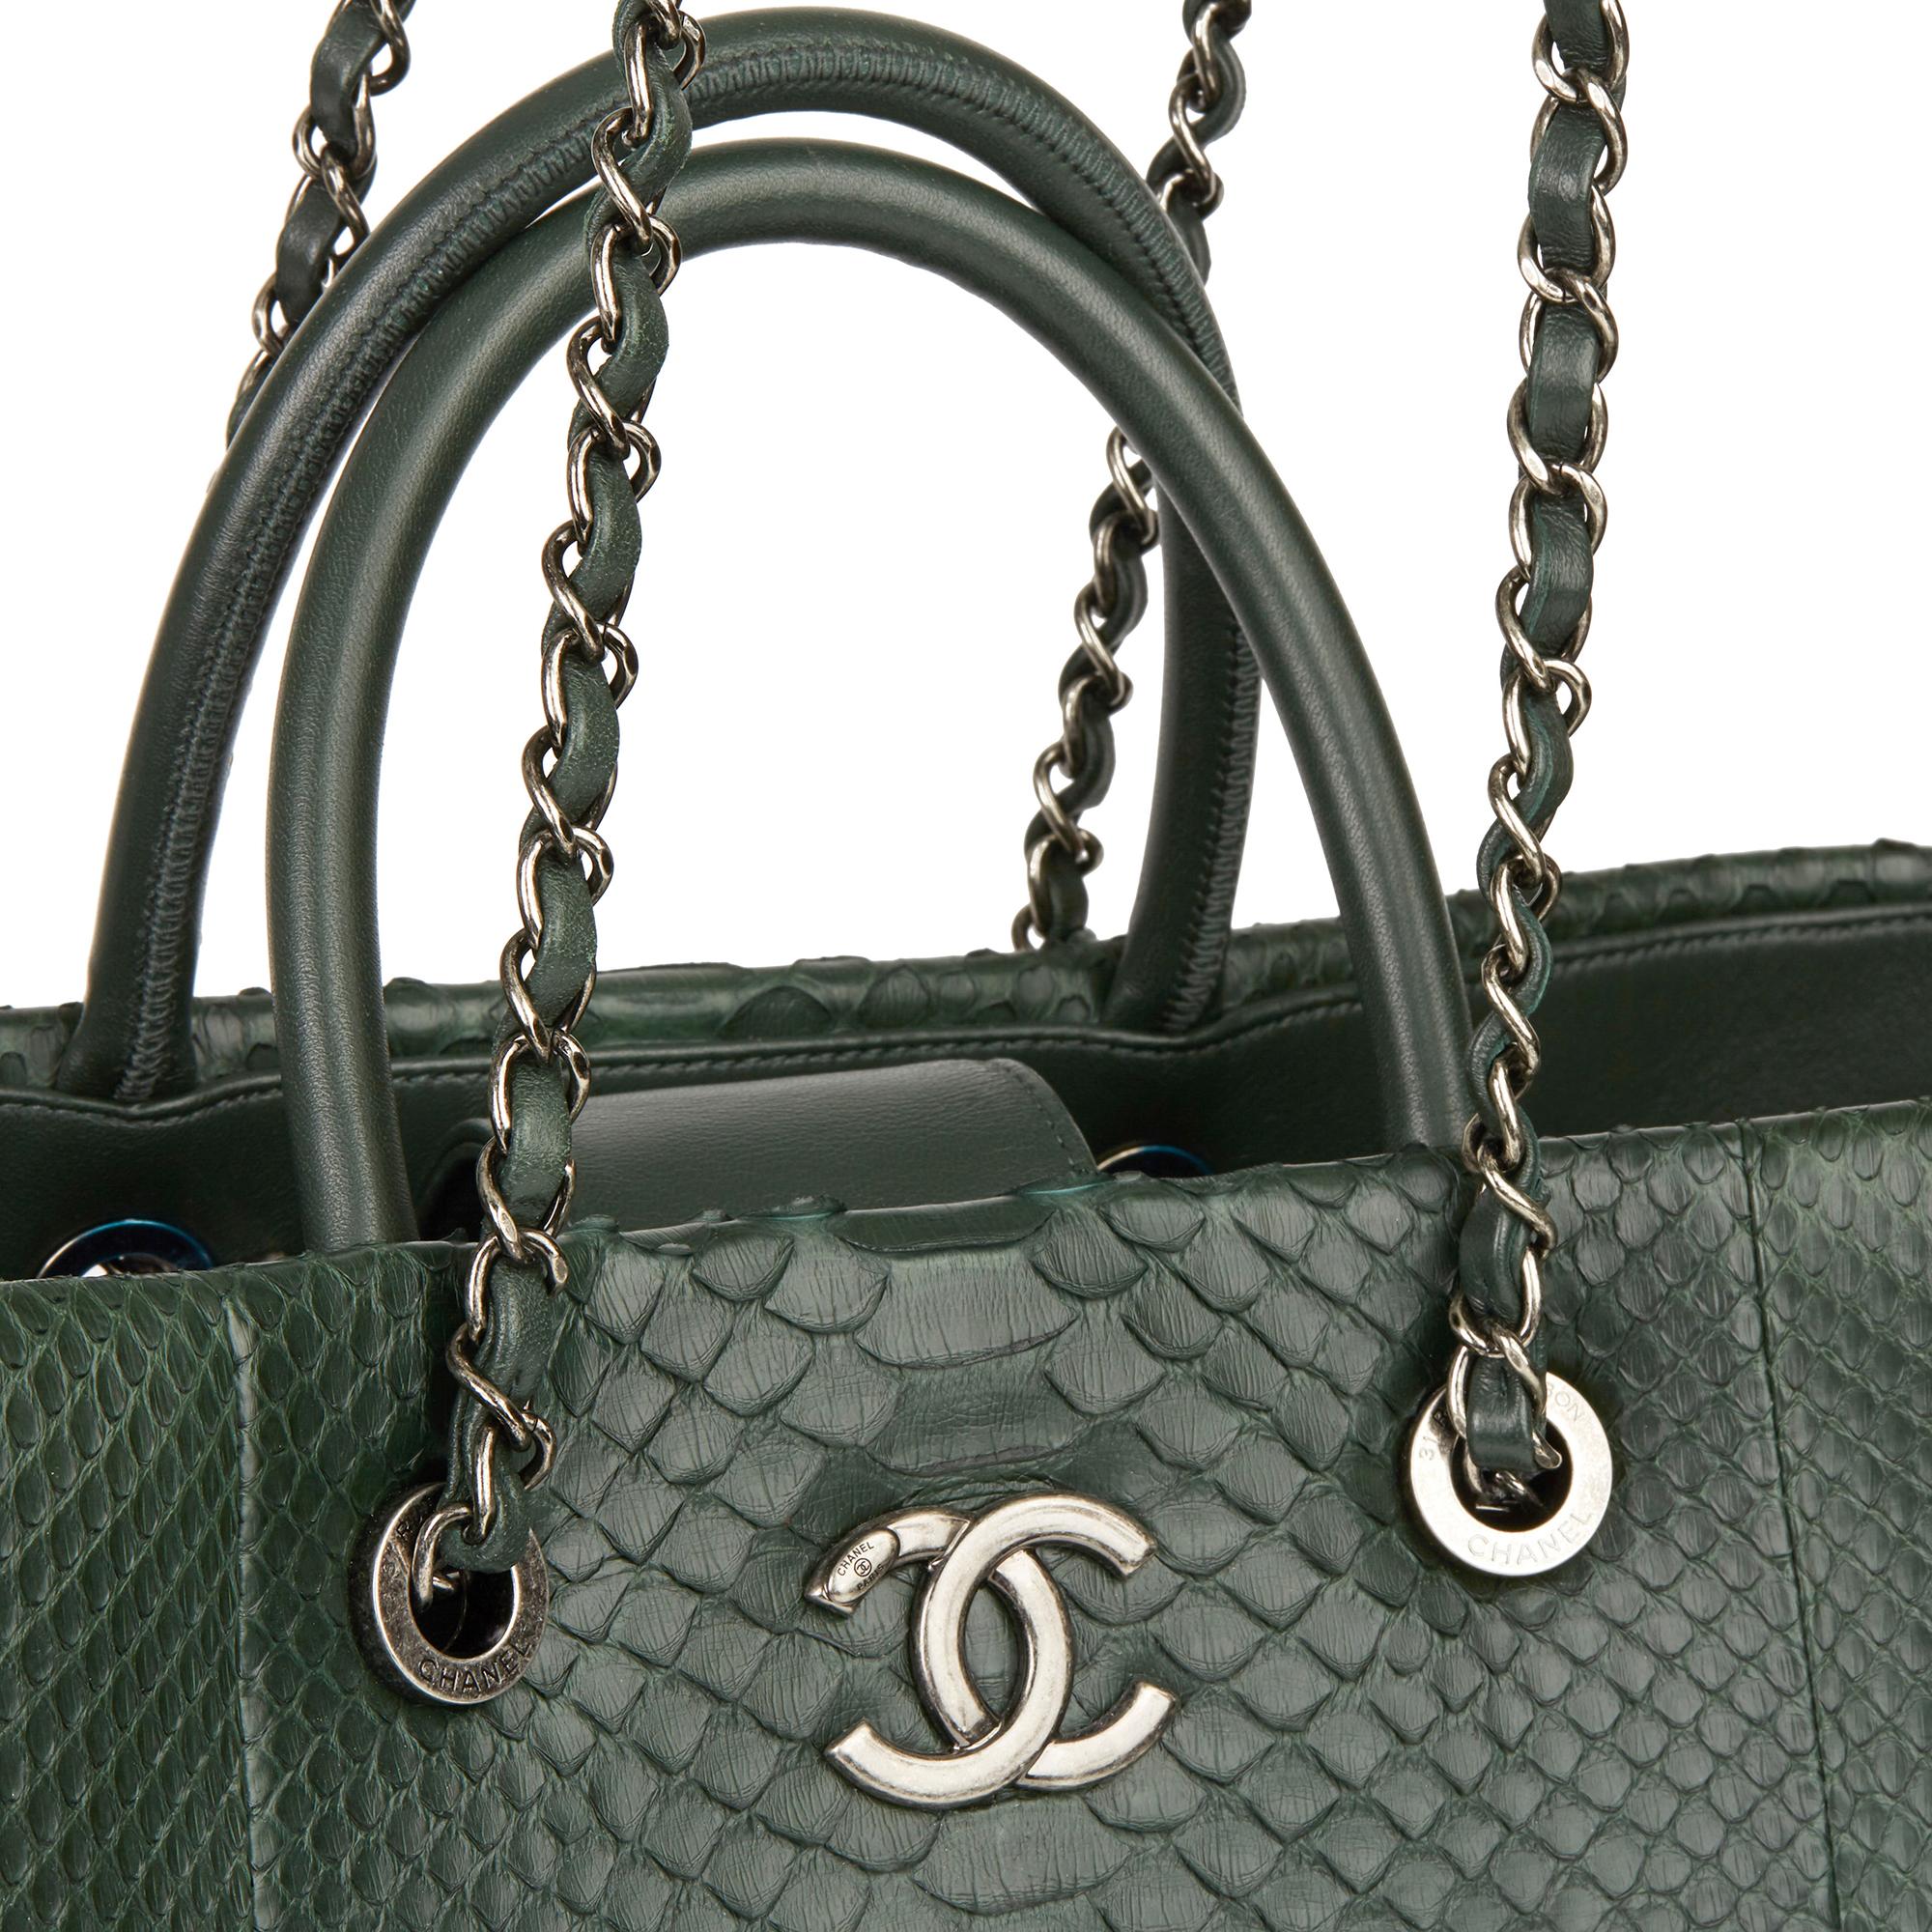 Women's 2017 Chanel Dark Green Python Leather Shopping Tote